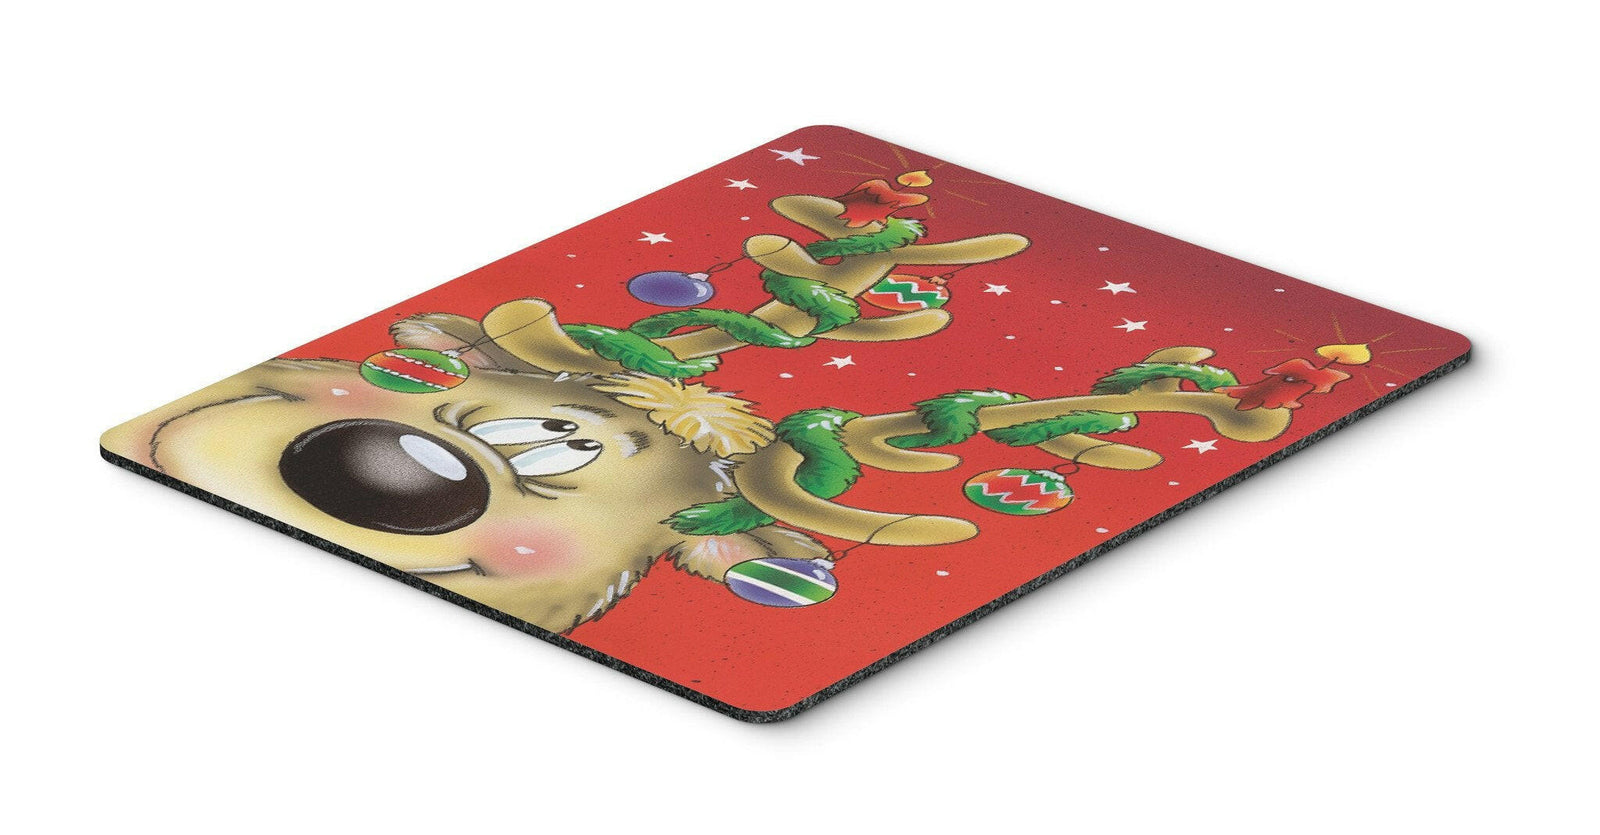 Comic Reindeer with Decorated Antlers Mouse Pad, Hot Pad or Trivet AAH7206MP by Caroline's Treasures